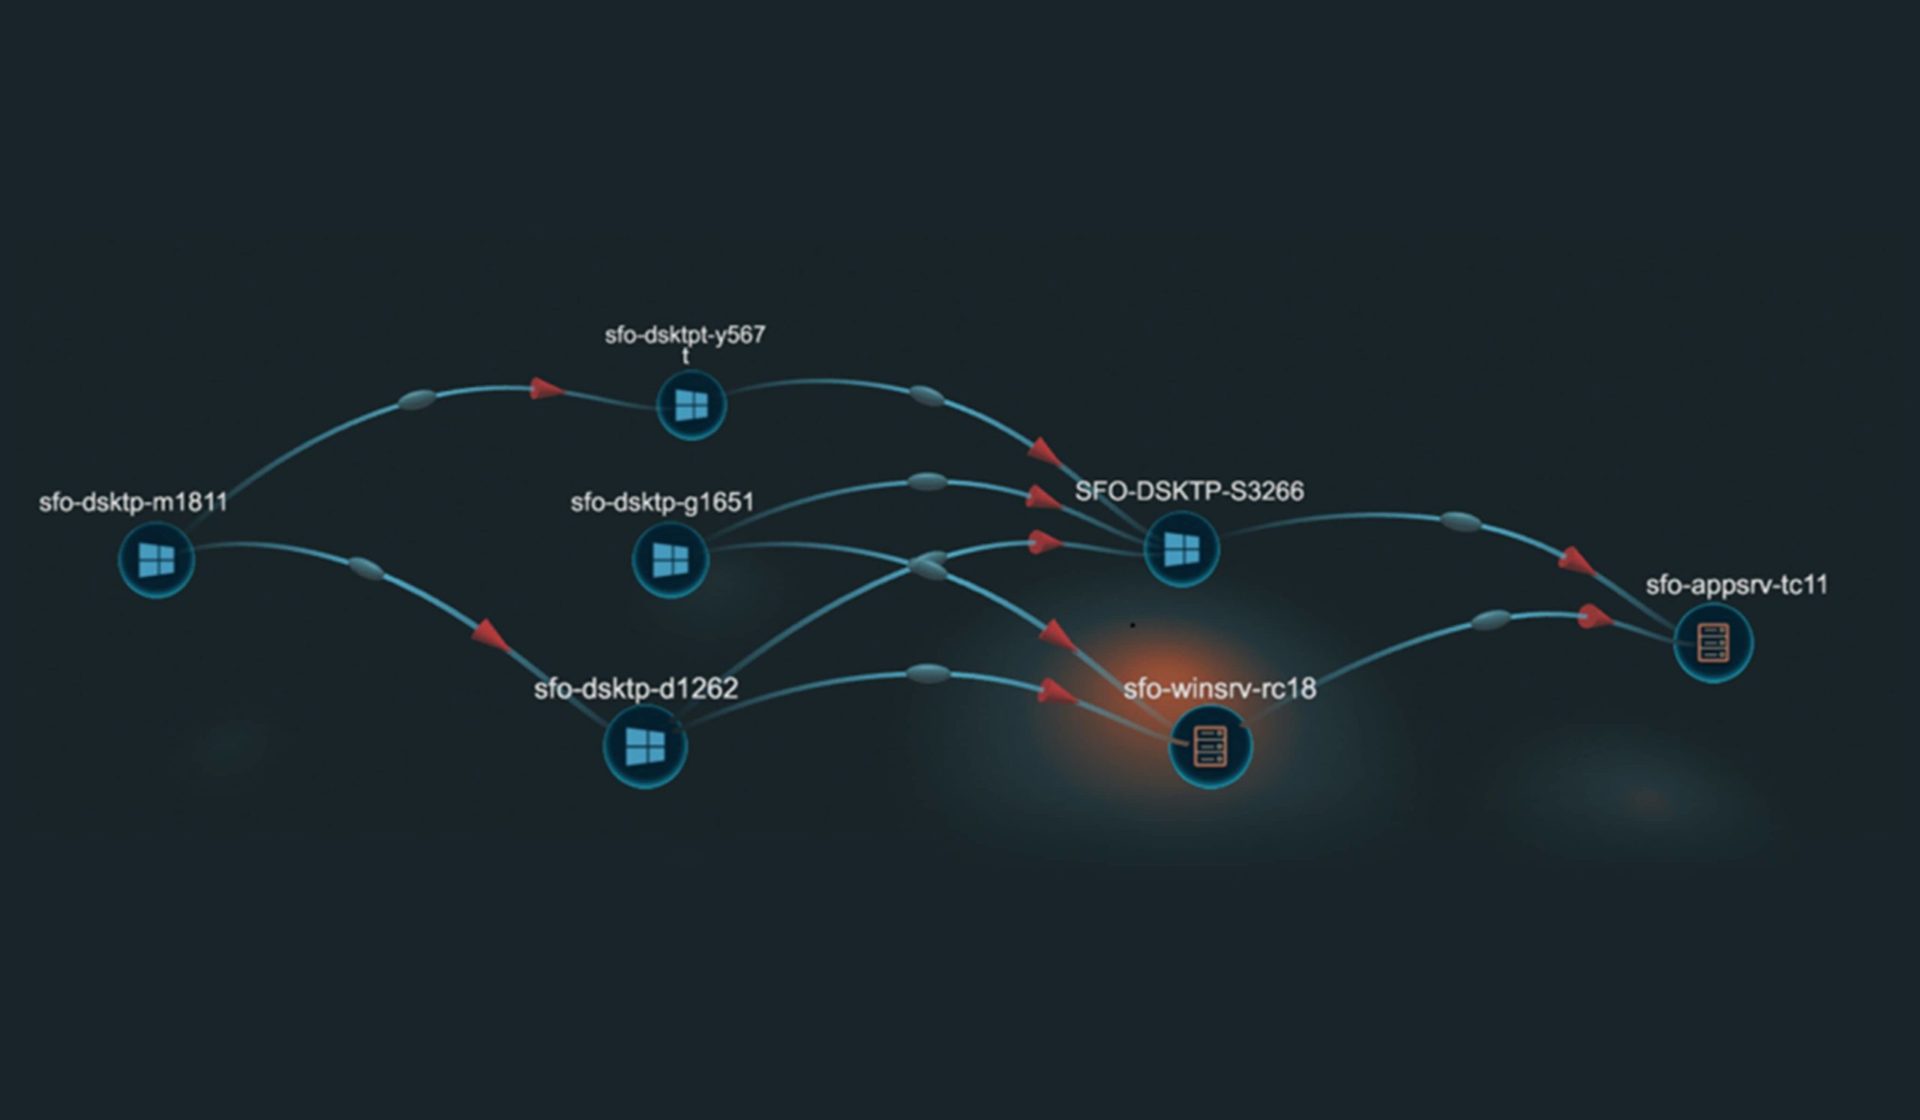 ShadowPlex traces the path of the attack through the enterprise network